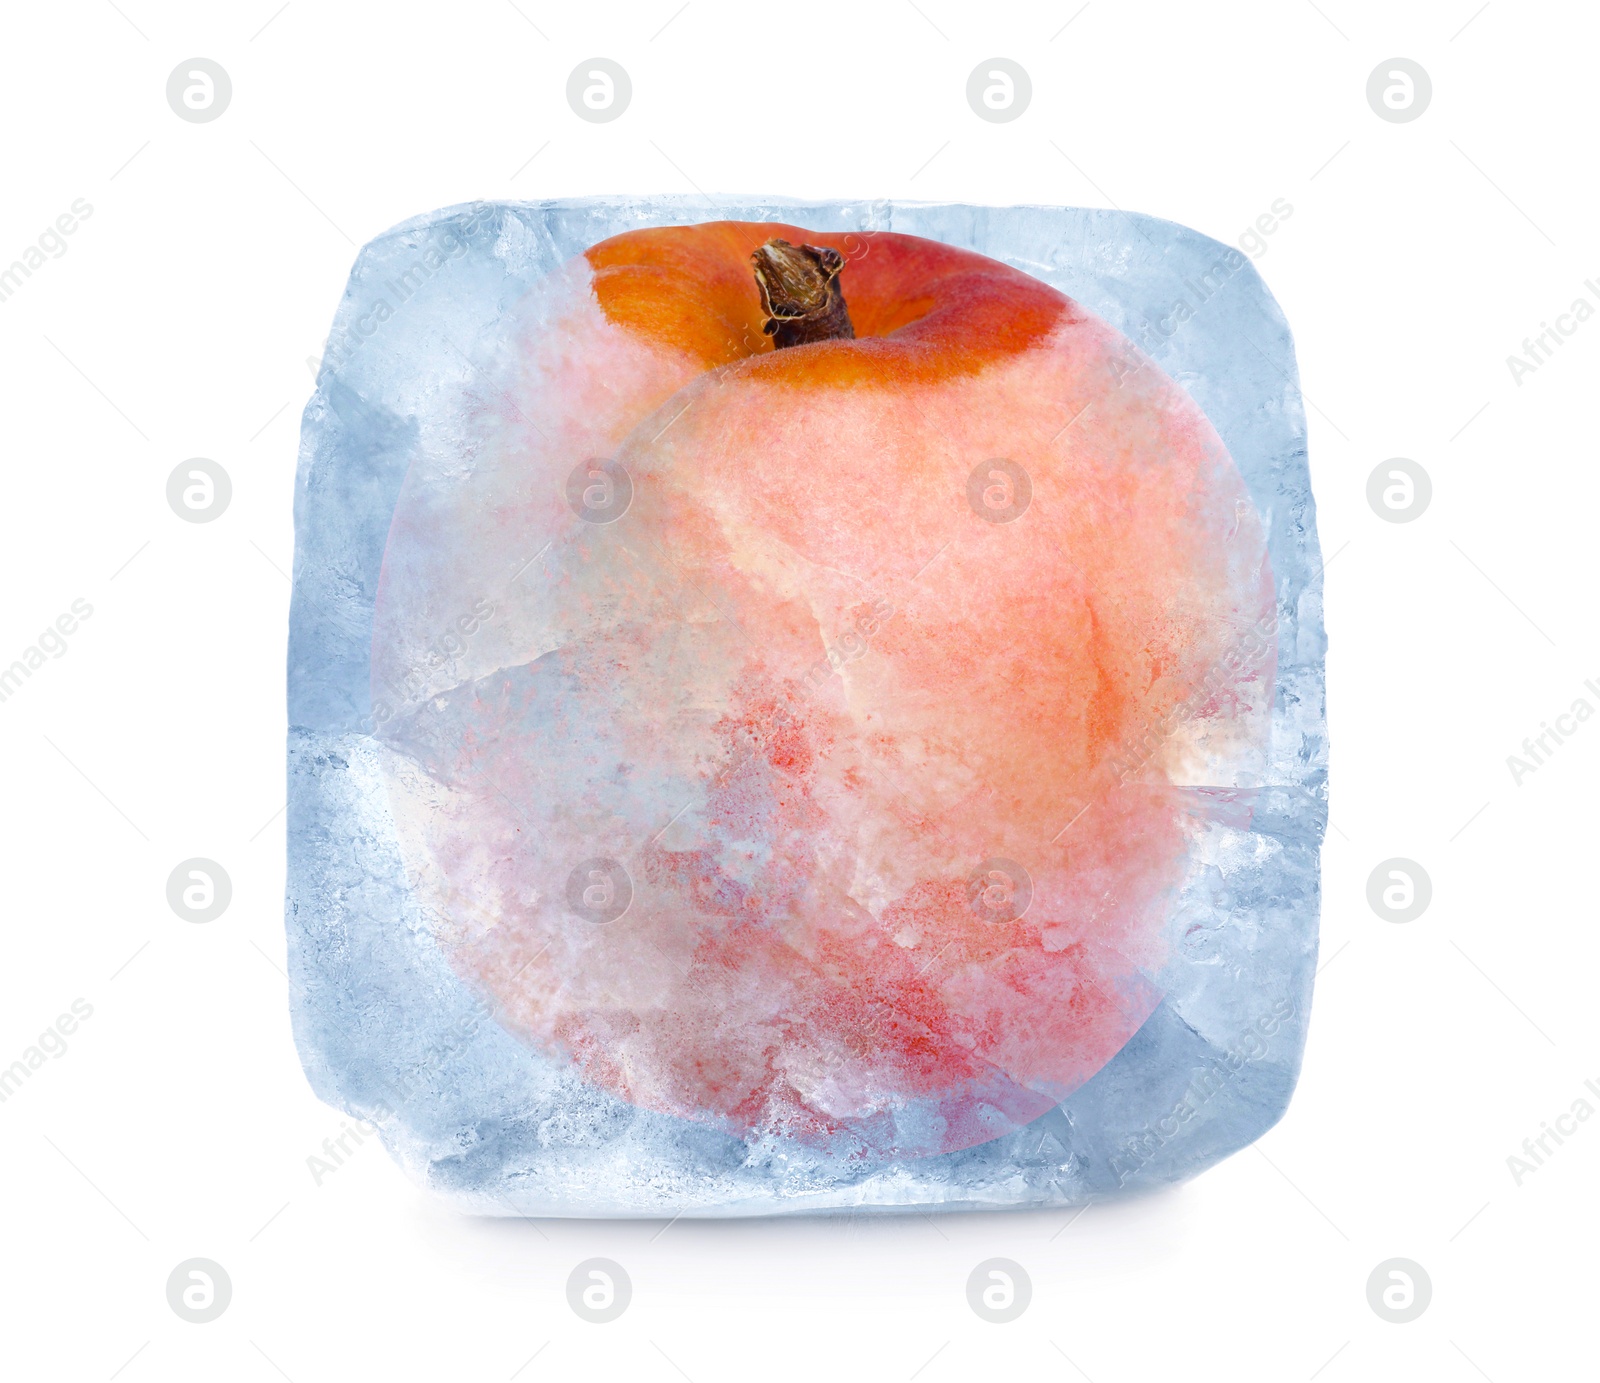 Image of Frozen food. Raw apricot in ice cube isolated on white